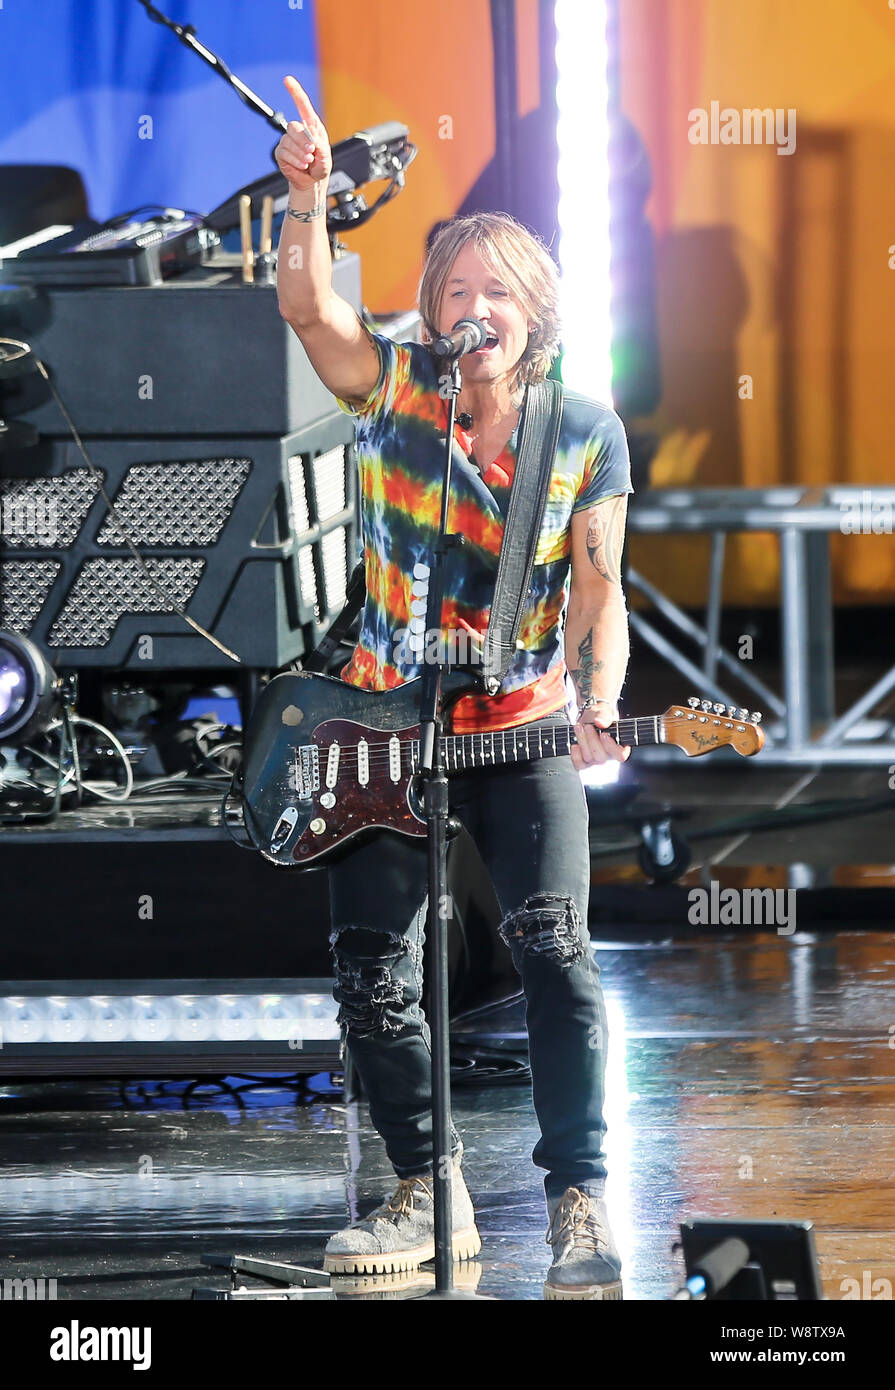 NEW YORK - AUG 9: Keith Urban performs on ABC's 'Good Morning America' on August 9, 2019 at Rumsey Playfield in New York City. Stock Photo